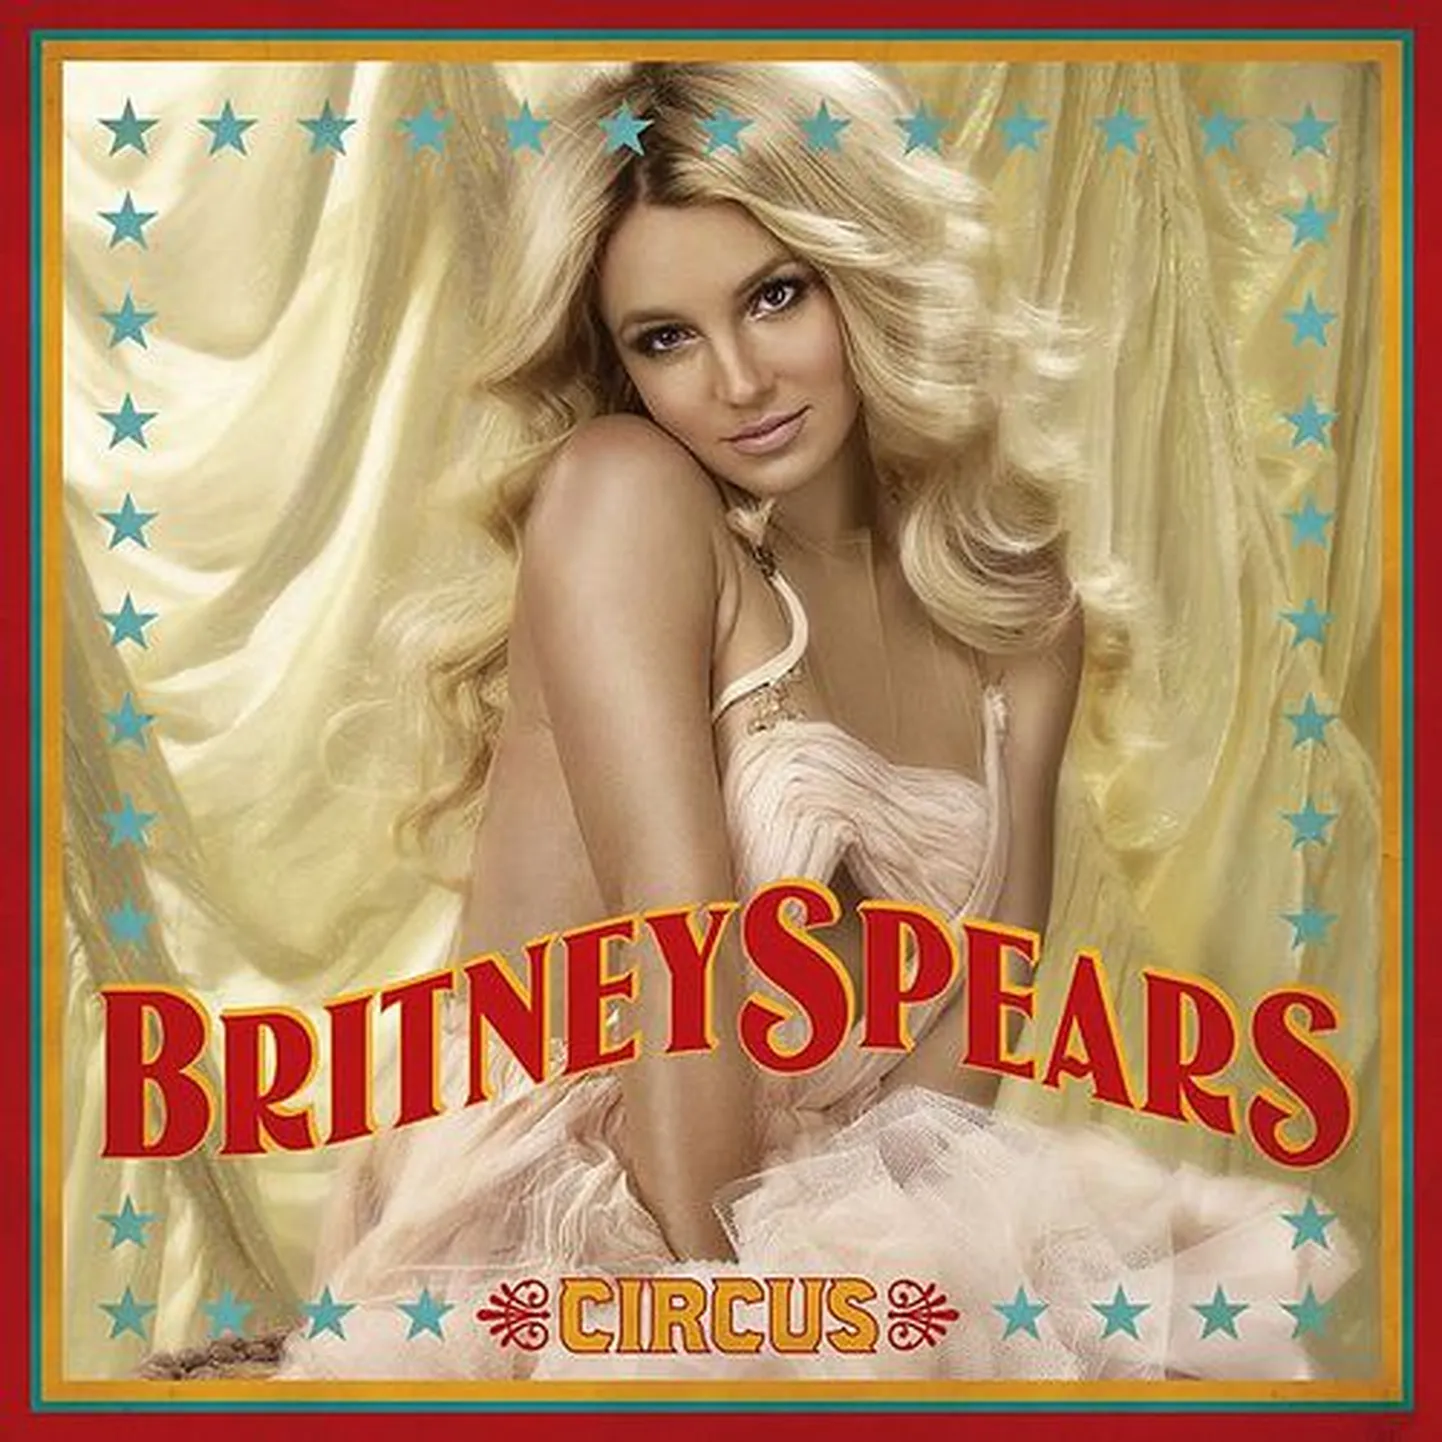 Britney Spears “Circus”.